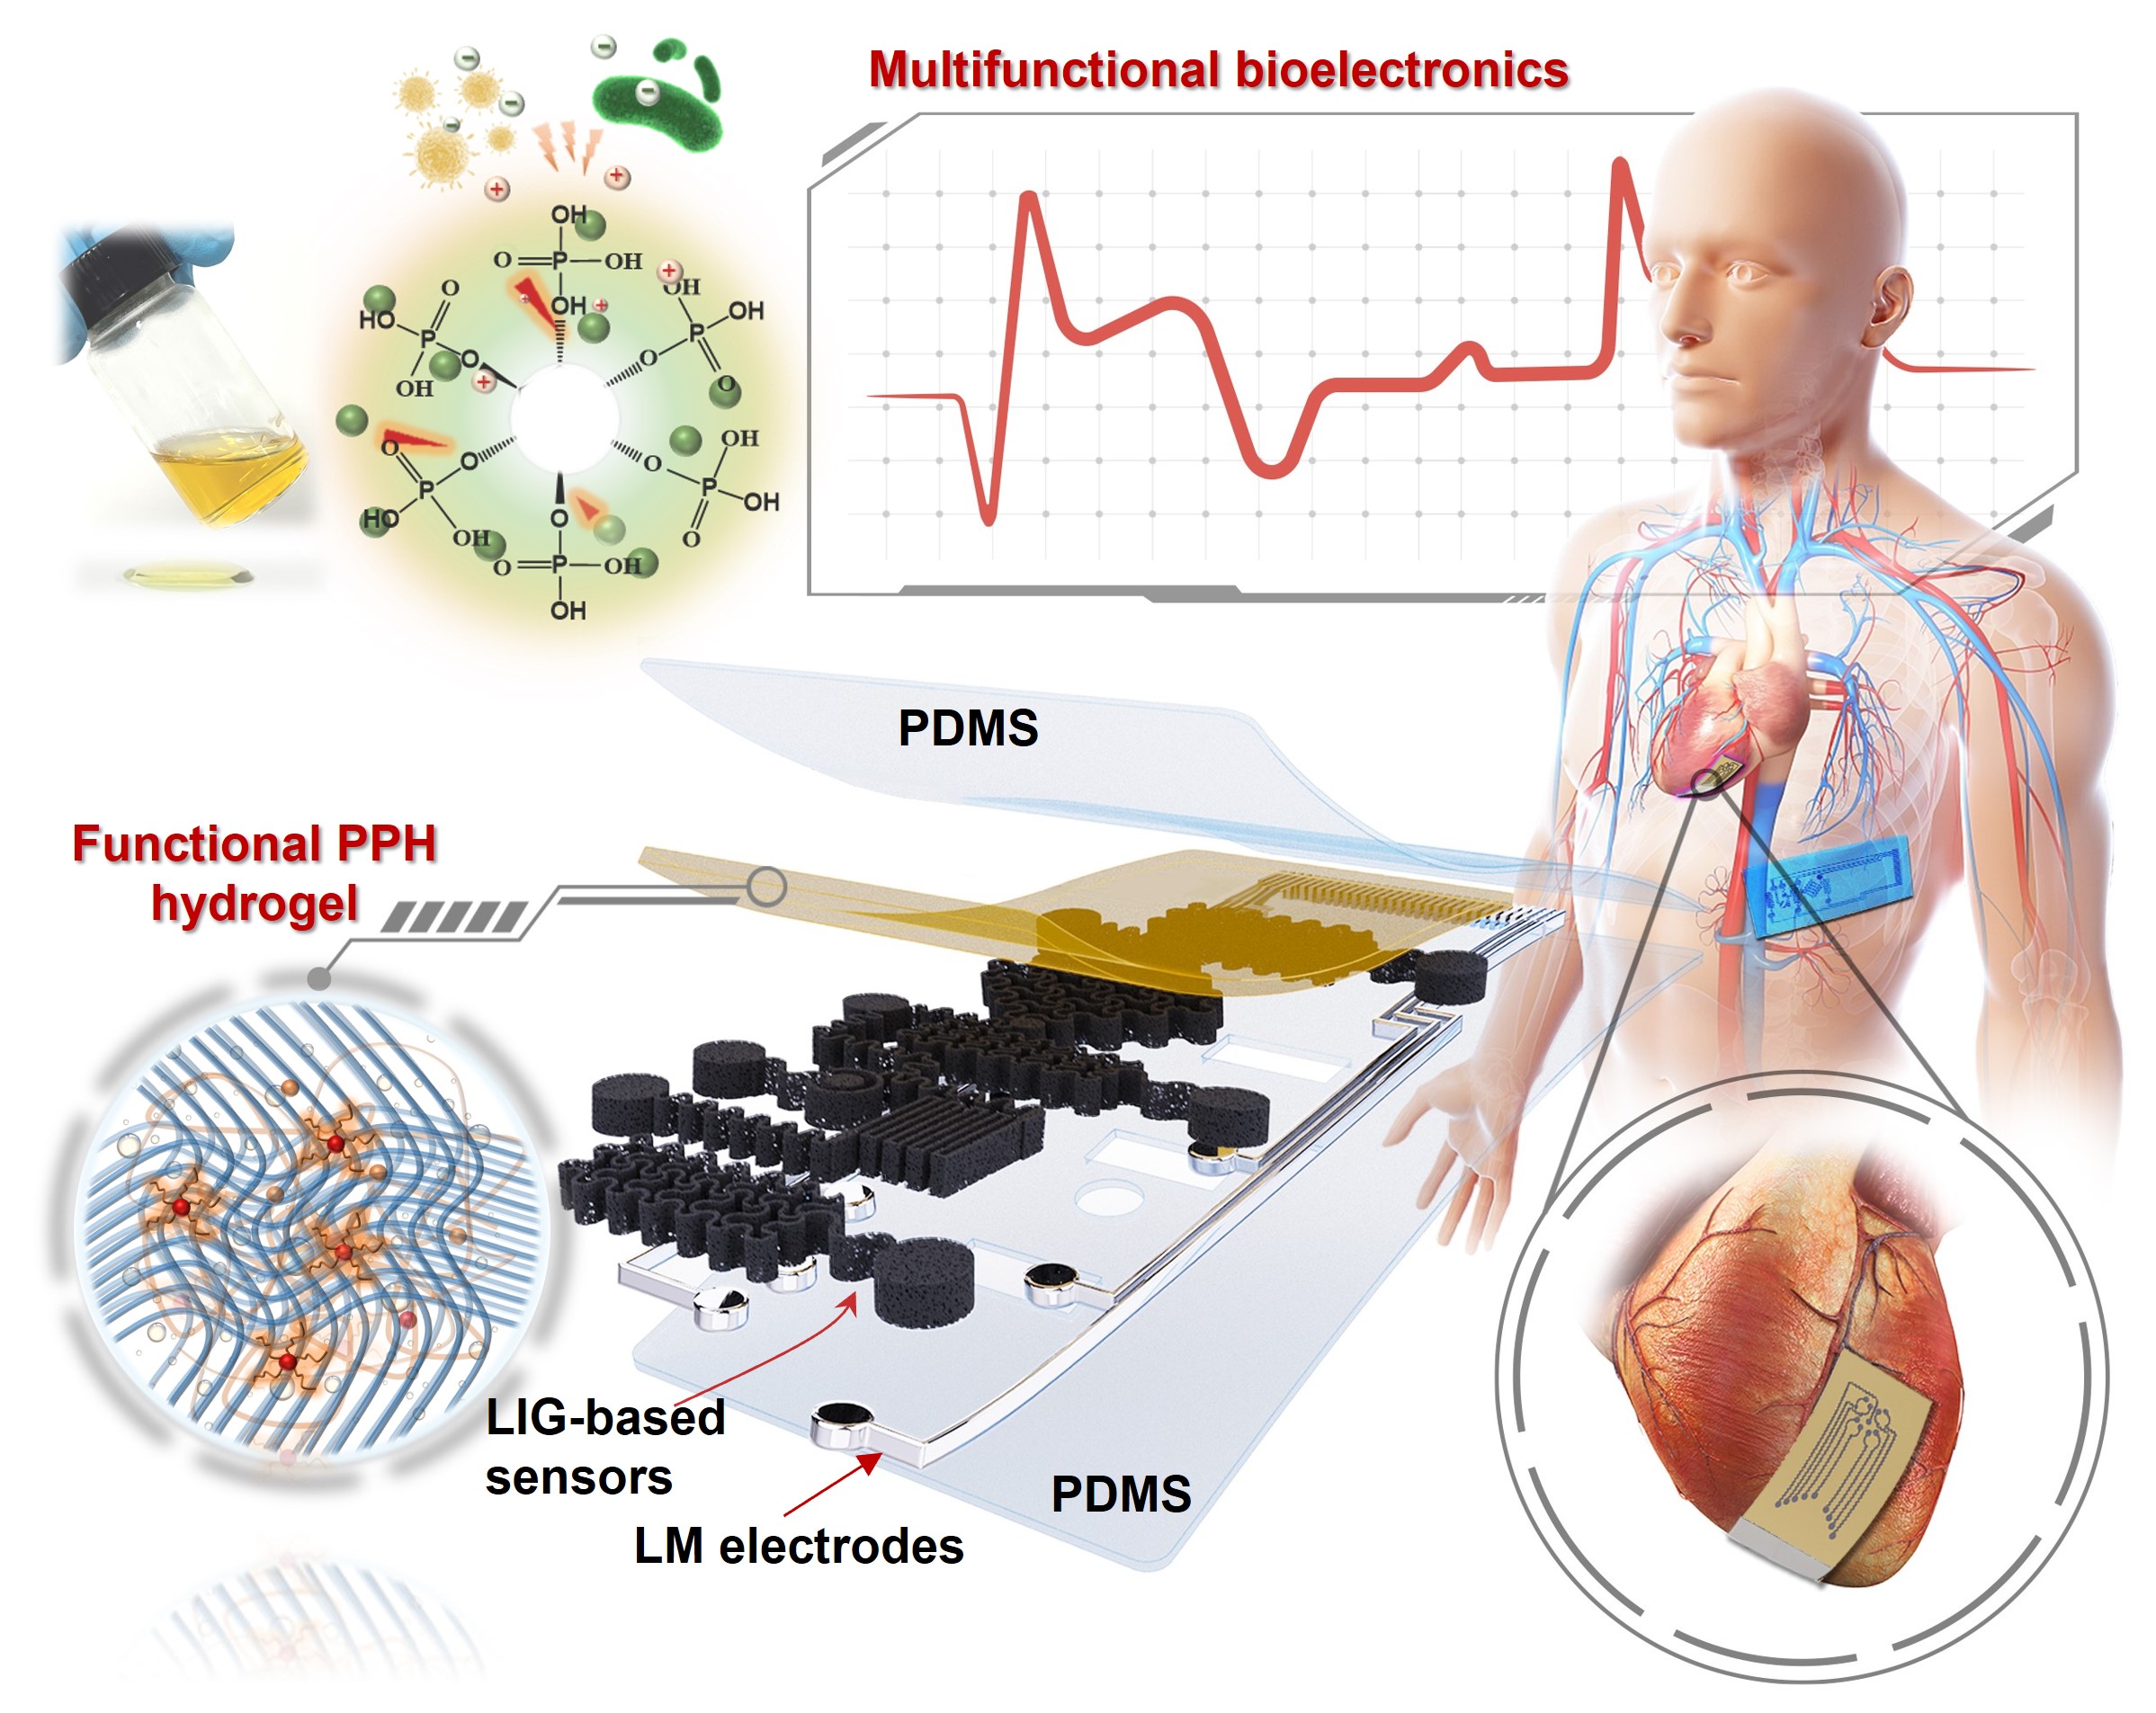 Design of ultrathin, antibacterial and biocompatible PPH hydrogel-enhanced stretchable nanocomposites for wearable and implantable bioelectronics